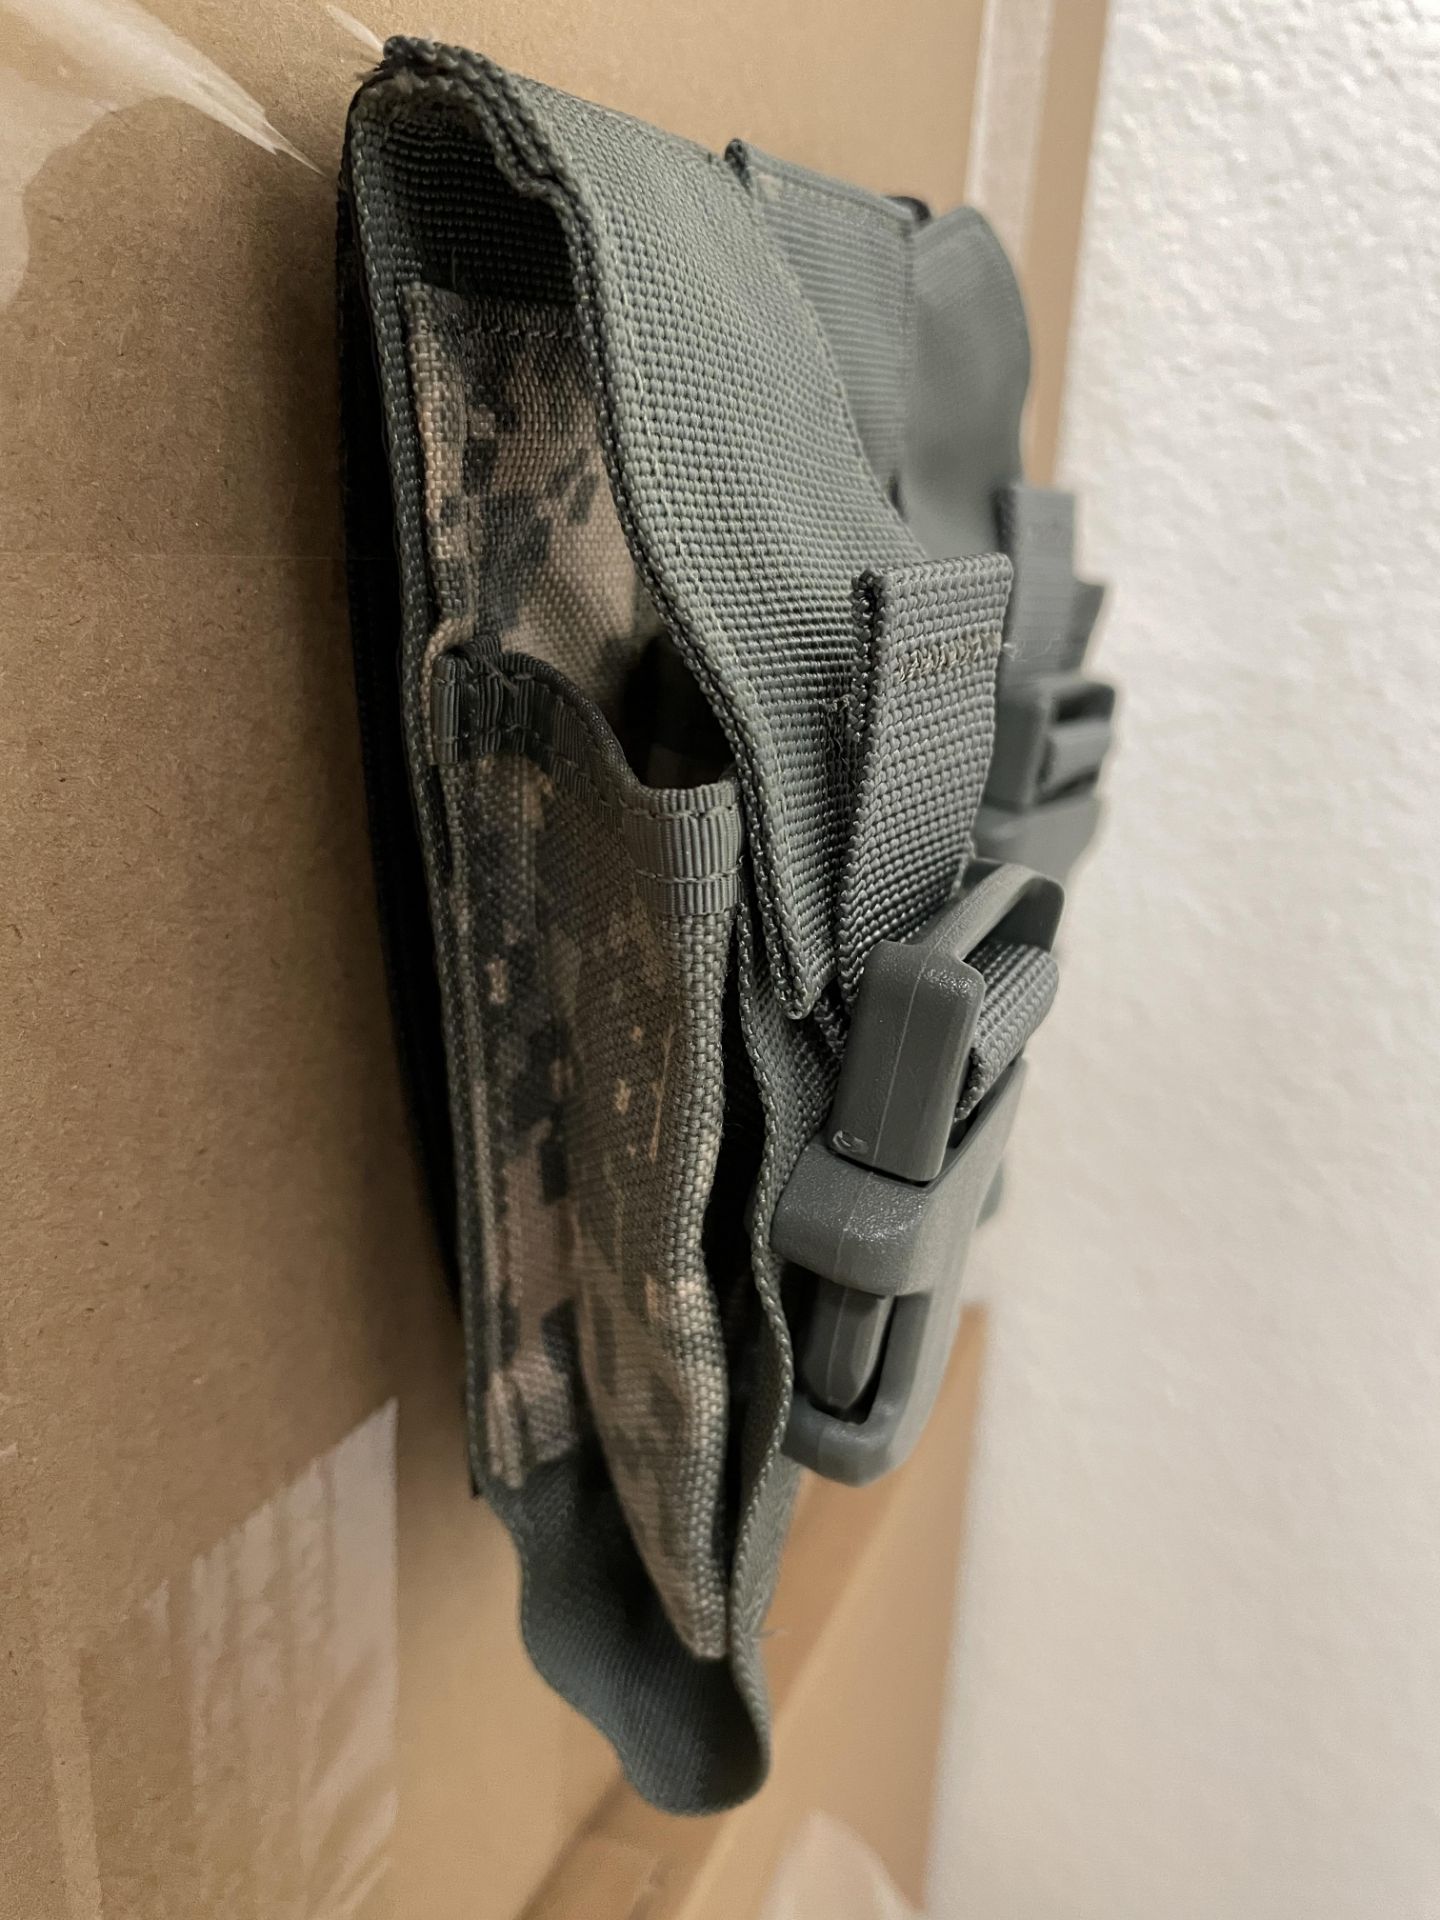 38 Blackwater Flash Bang Triple Pouches in Army Digital Camo, Tactical Gear - Image 3 of 6